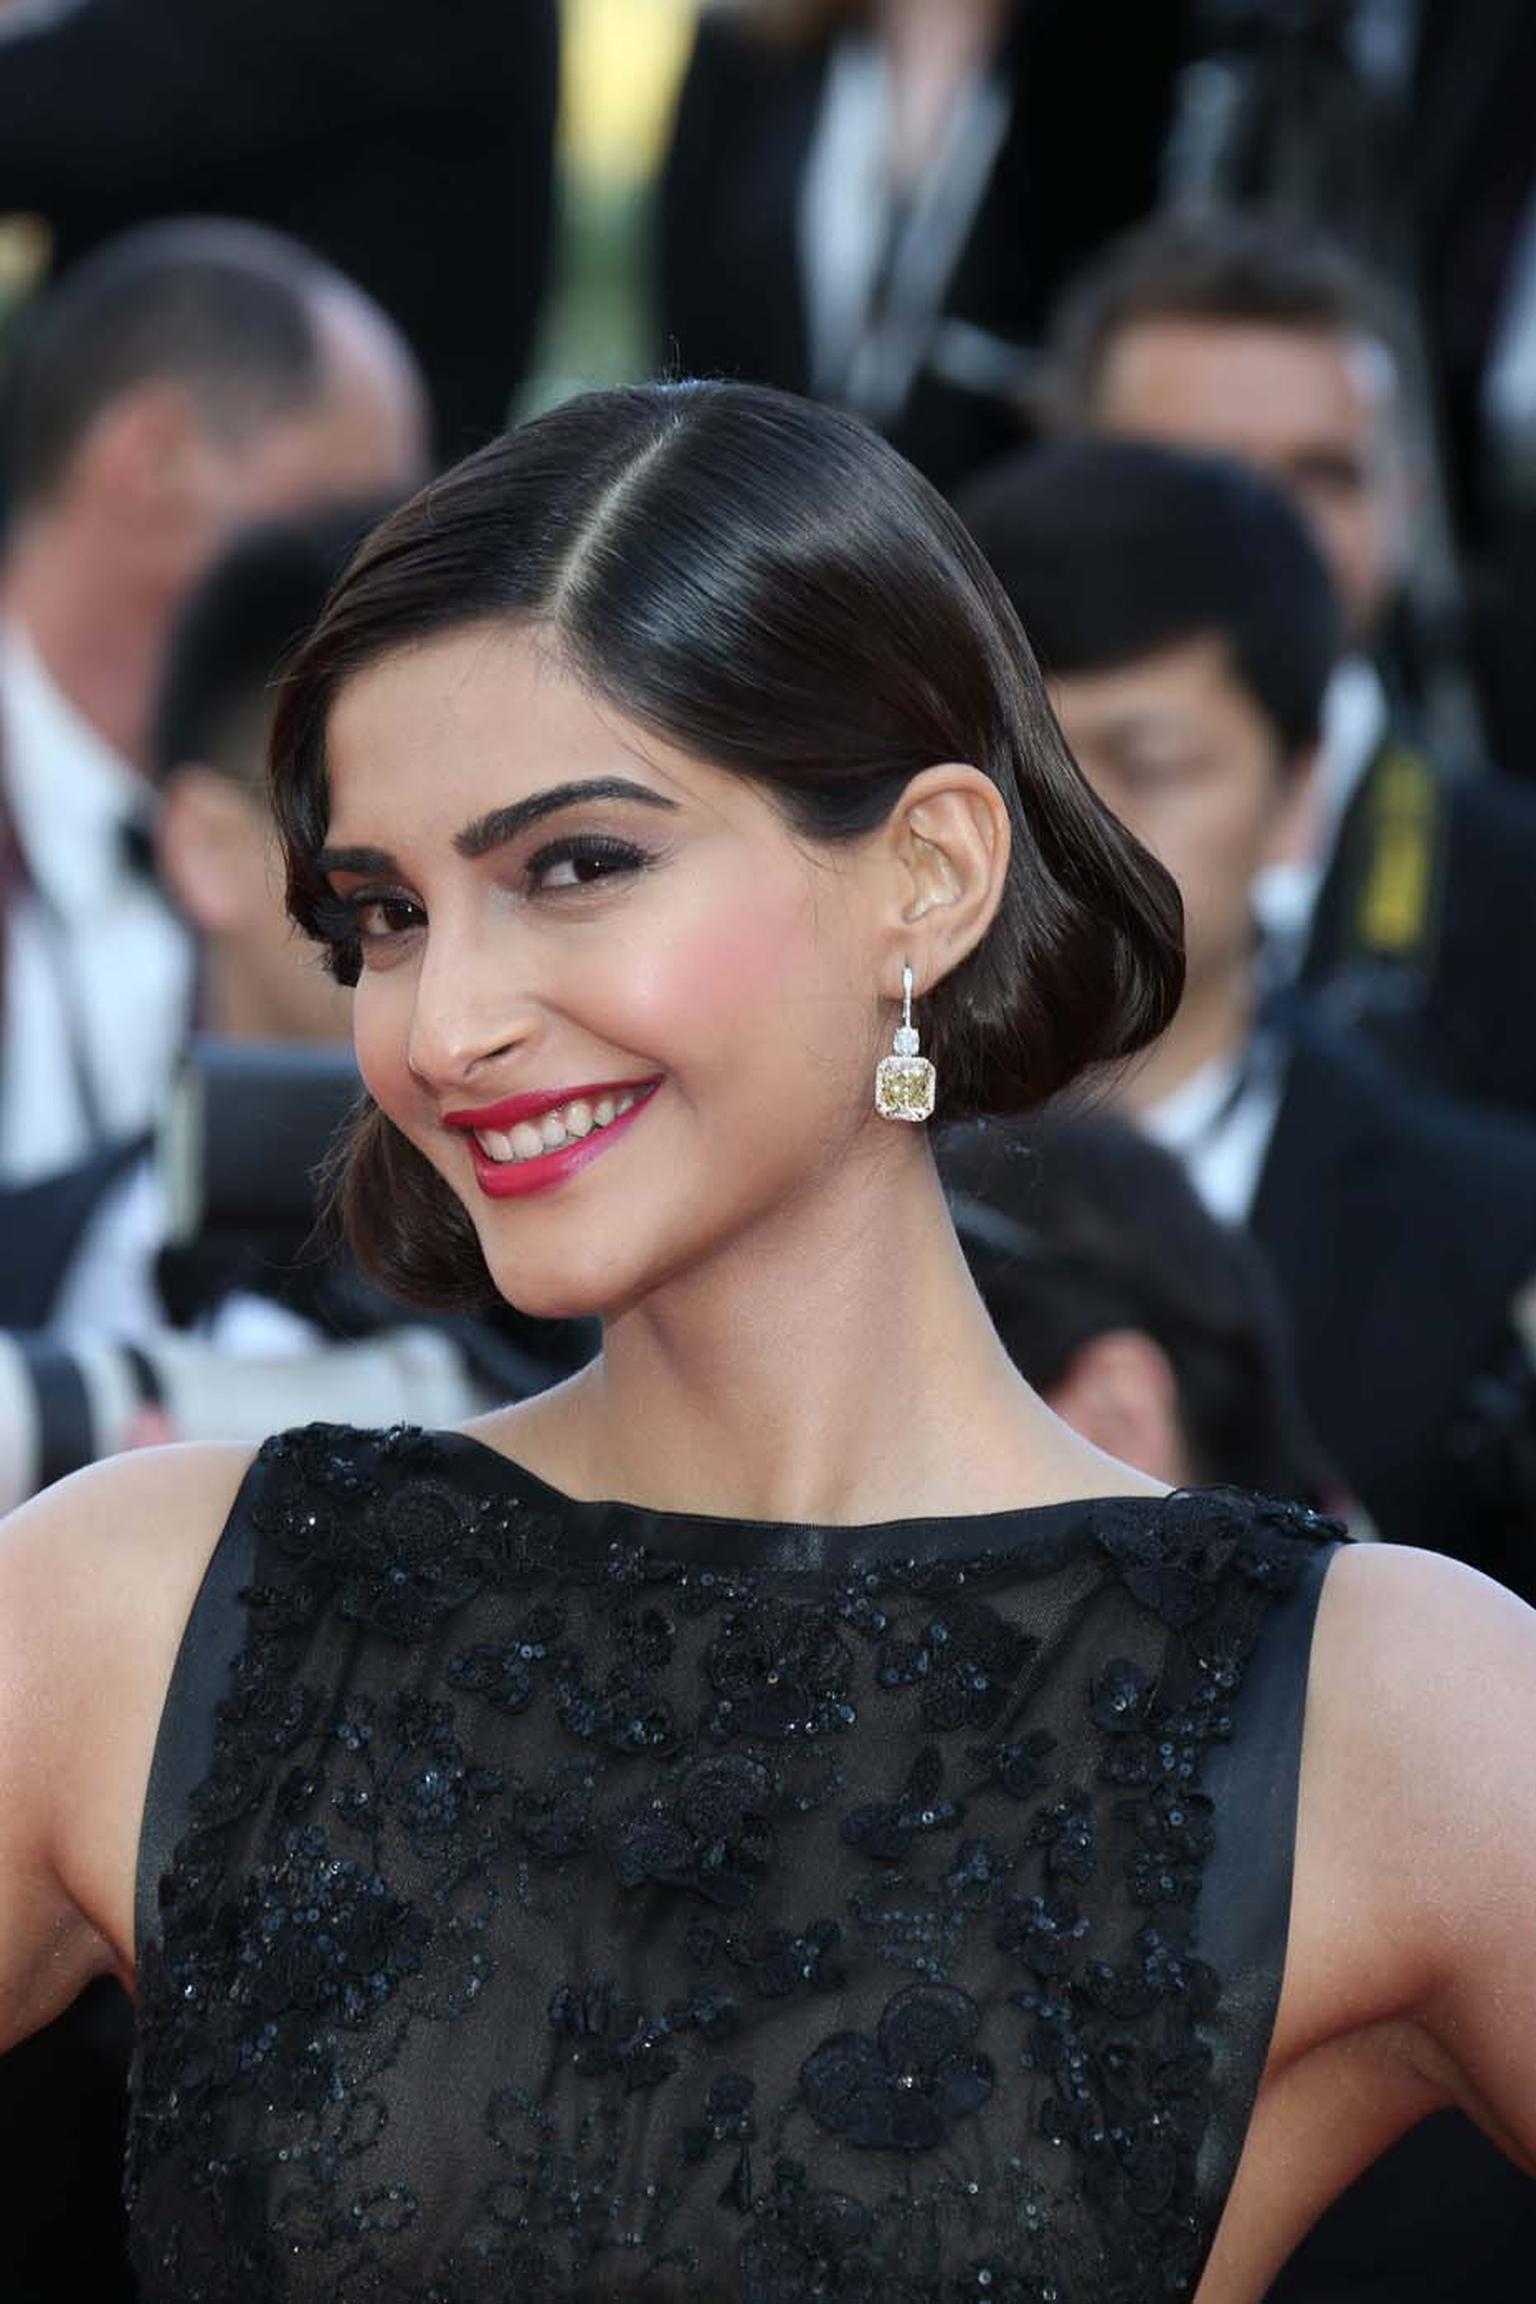 Sonam Kapoor wore Chopard earrings in yellow gold set with emerald-cut yellow diamonds (20cts) as well as cushion-cut and brilliant-cut diamonds.